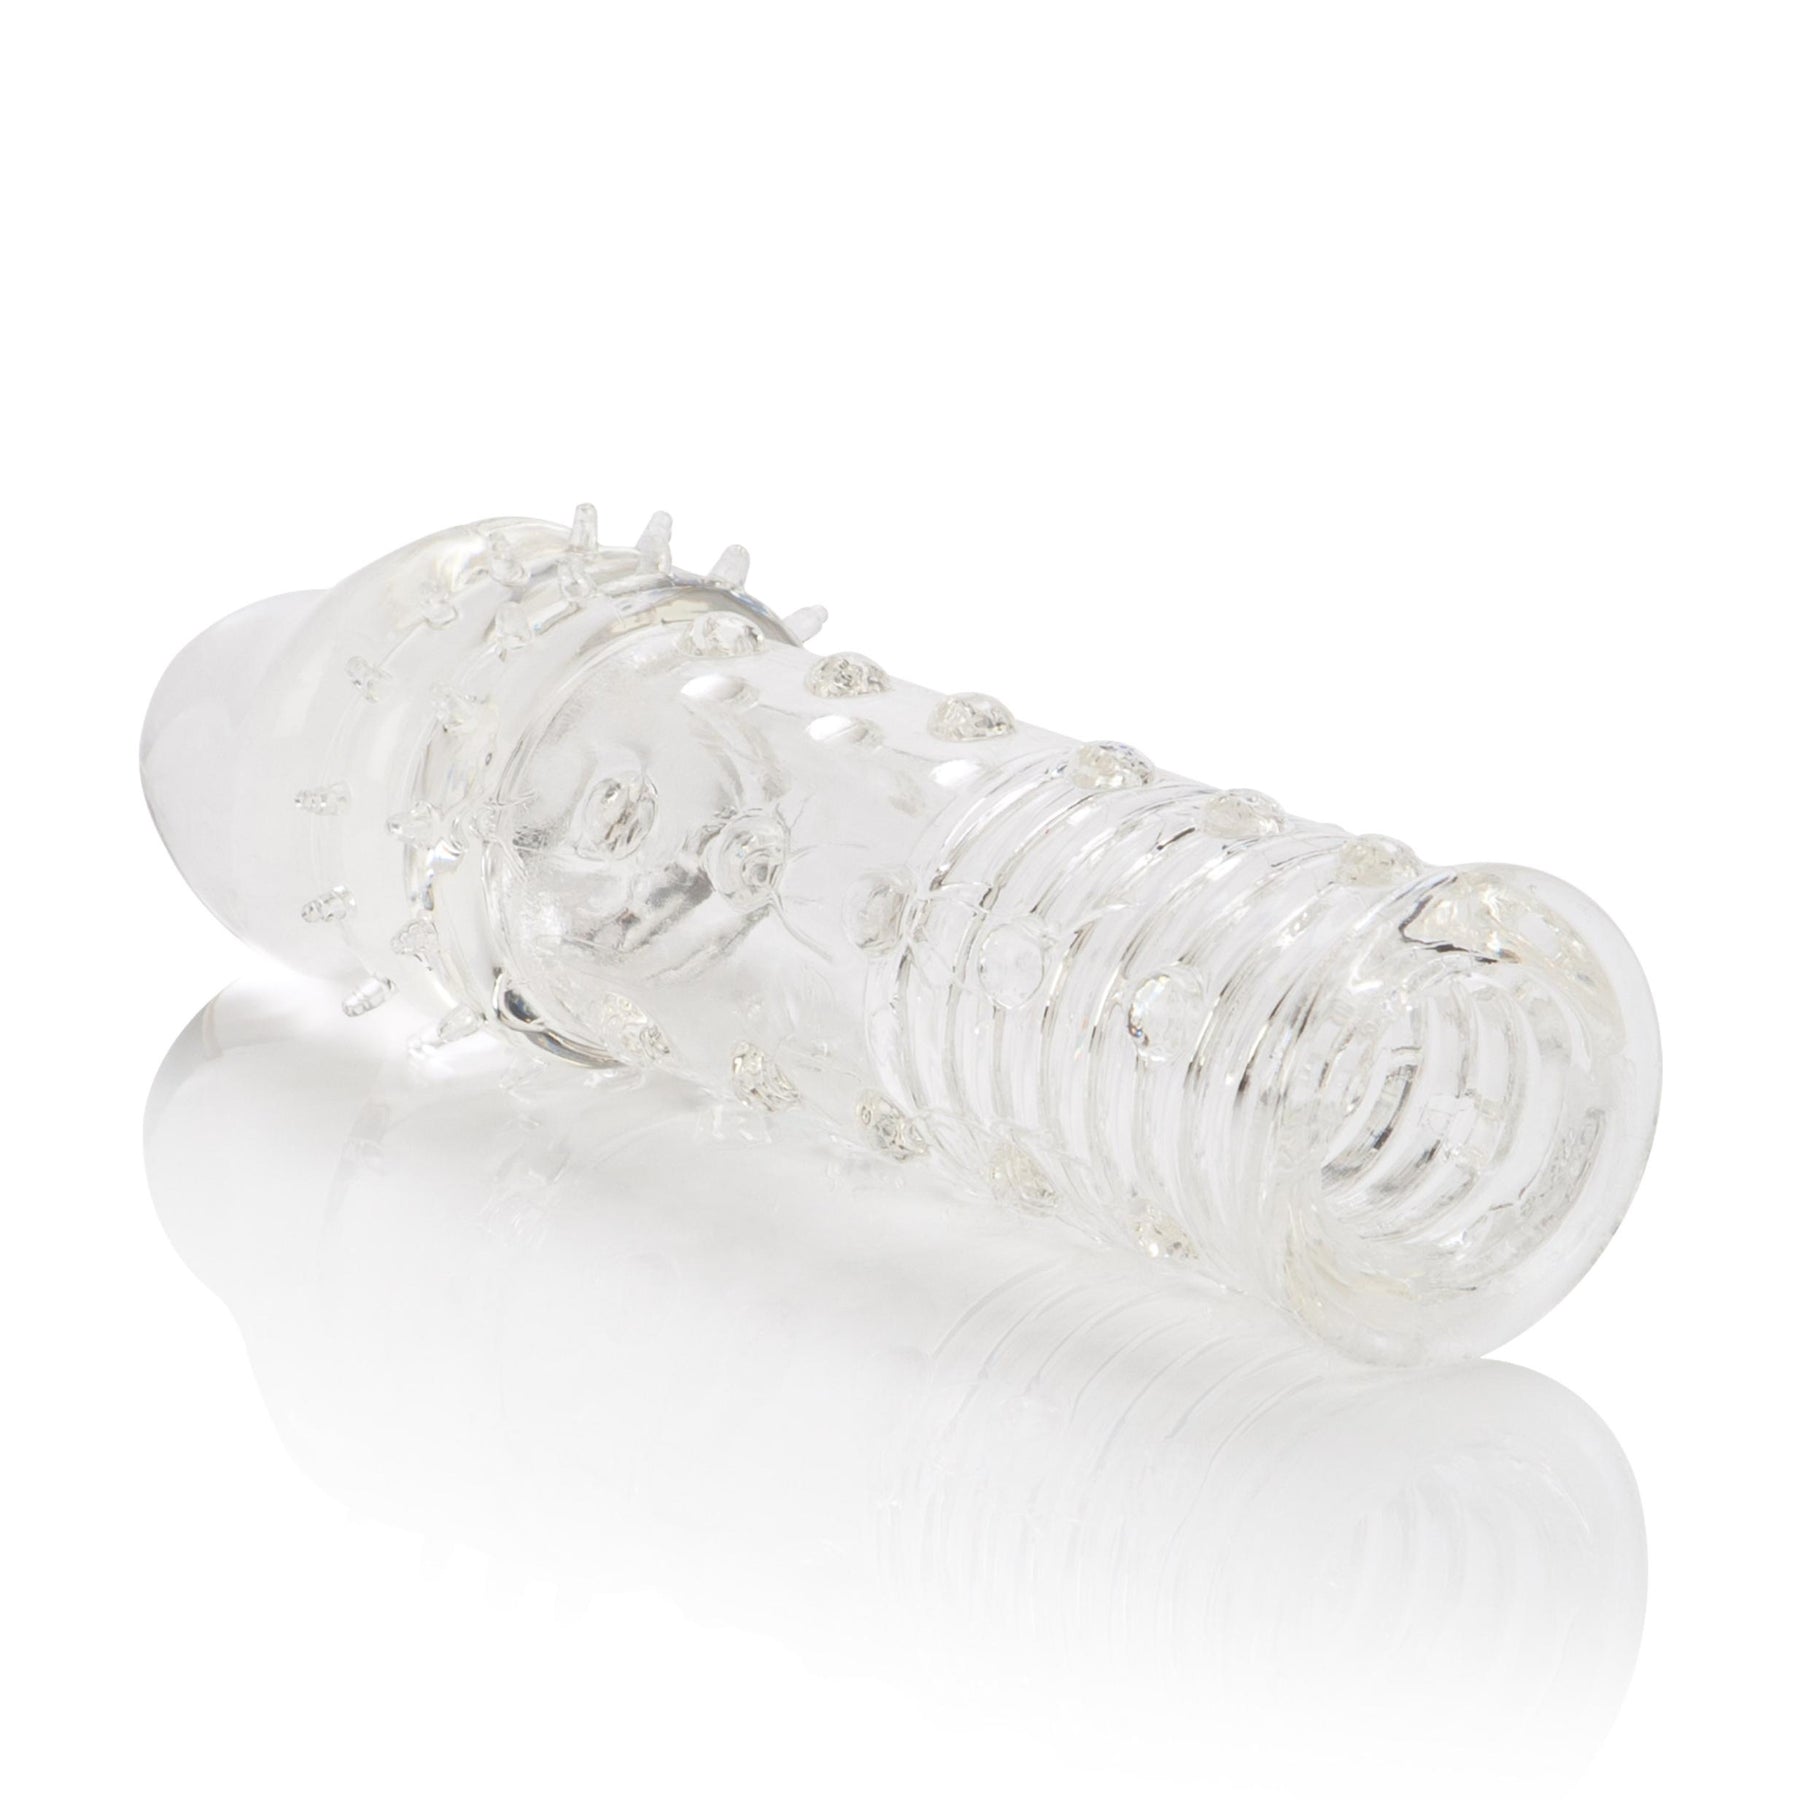 Clear penis extension for added length and pleasure sex toy